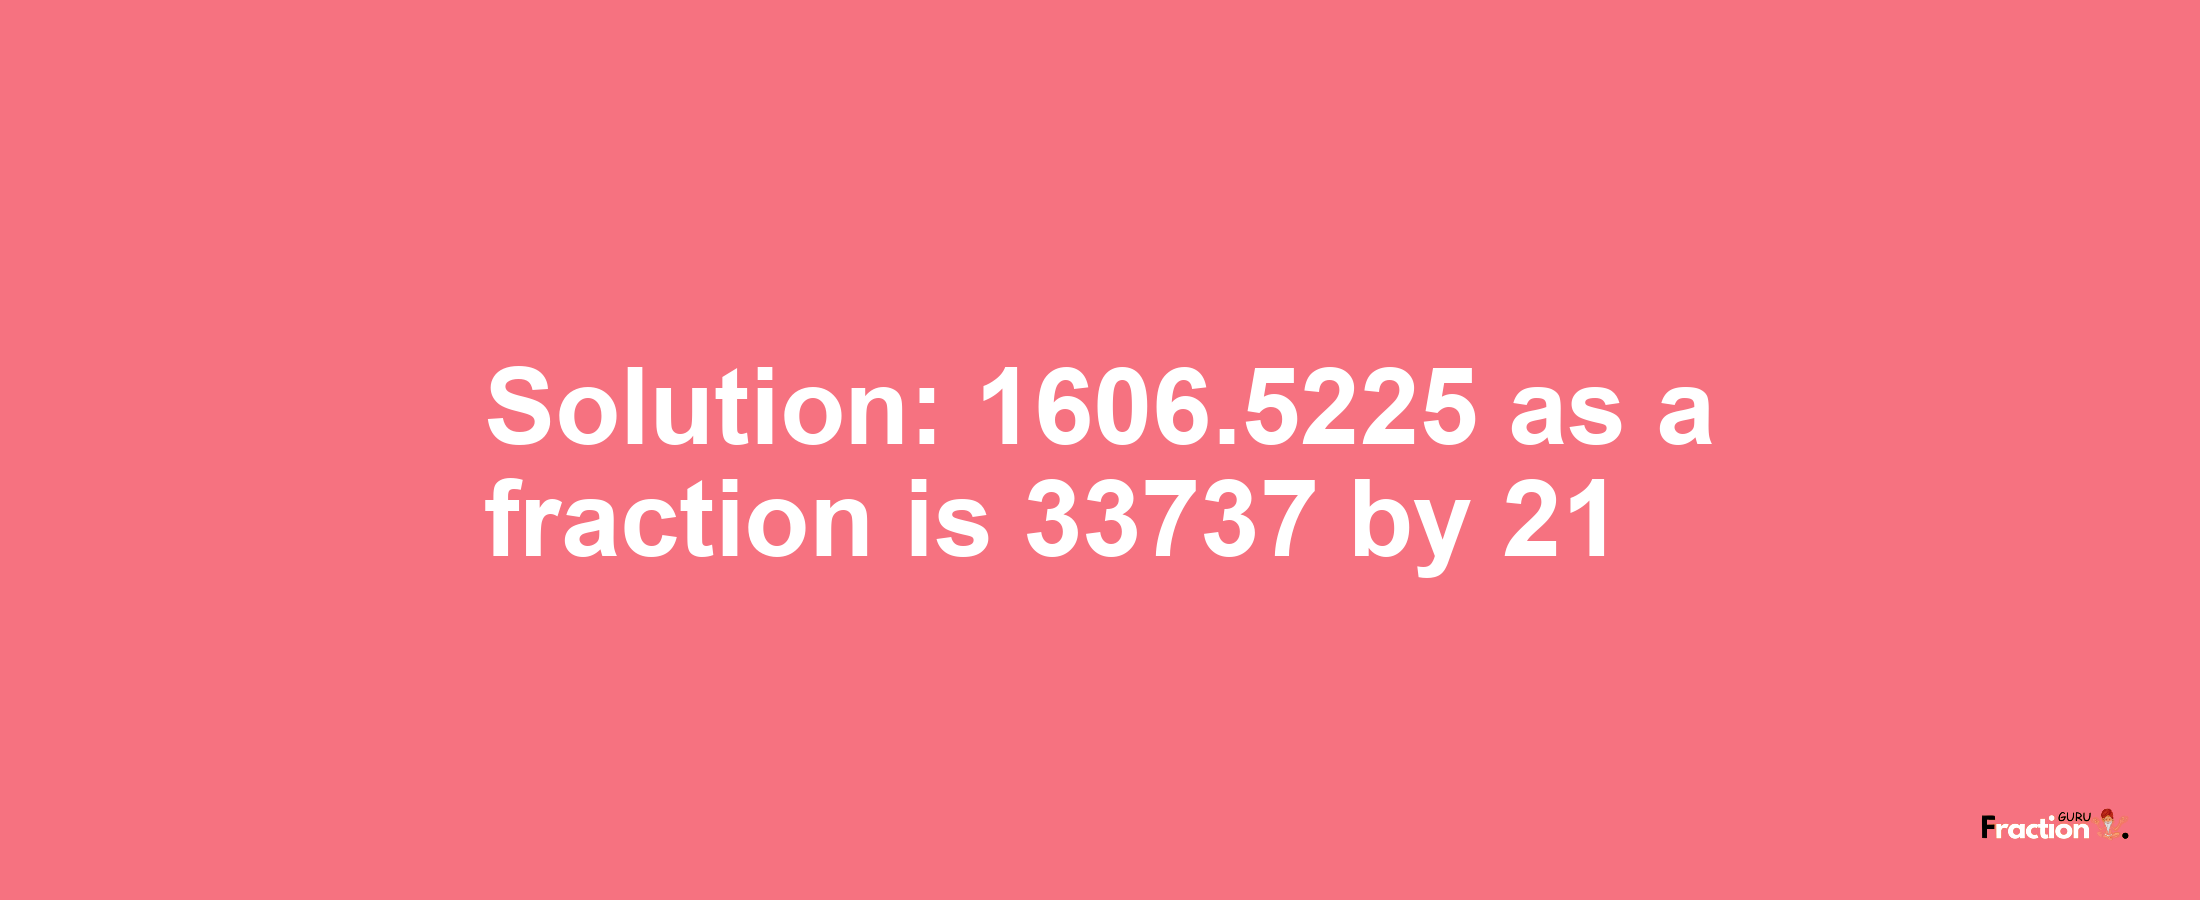 Solution:1606.5225 as a fraction is 33737/21